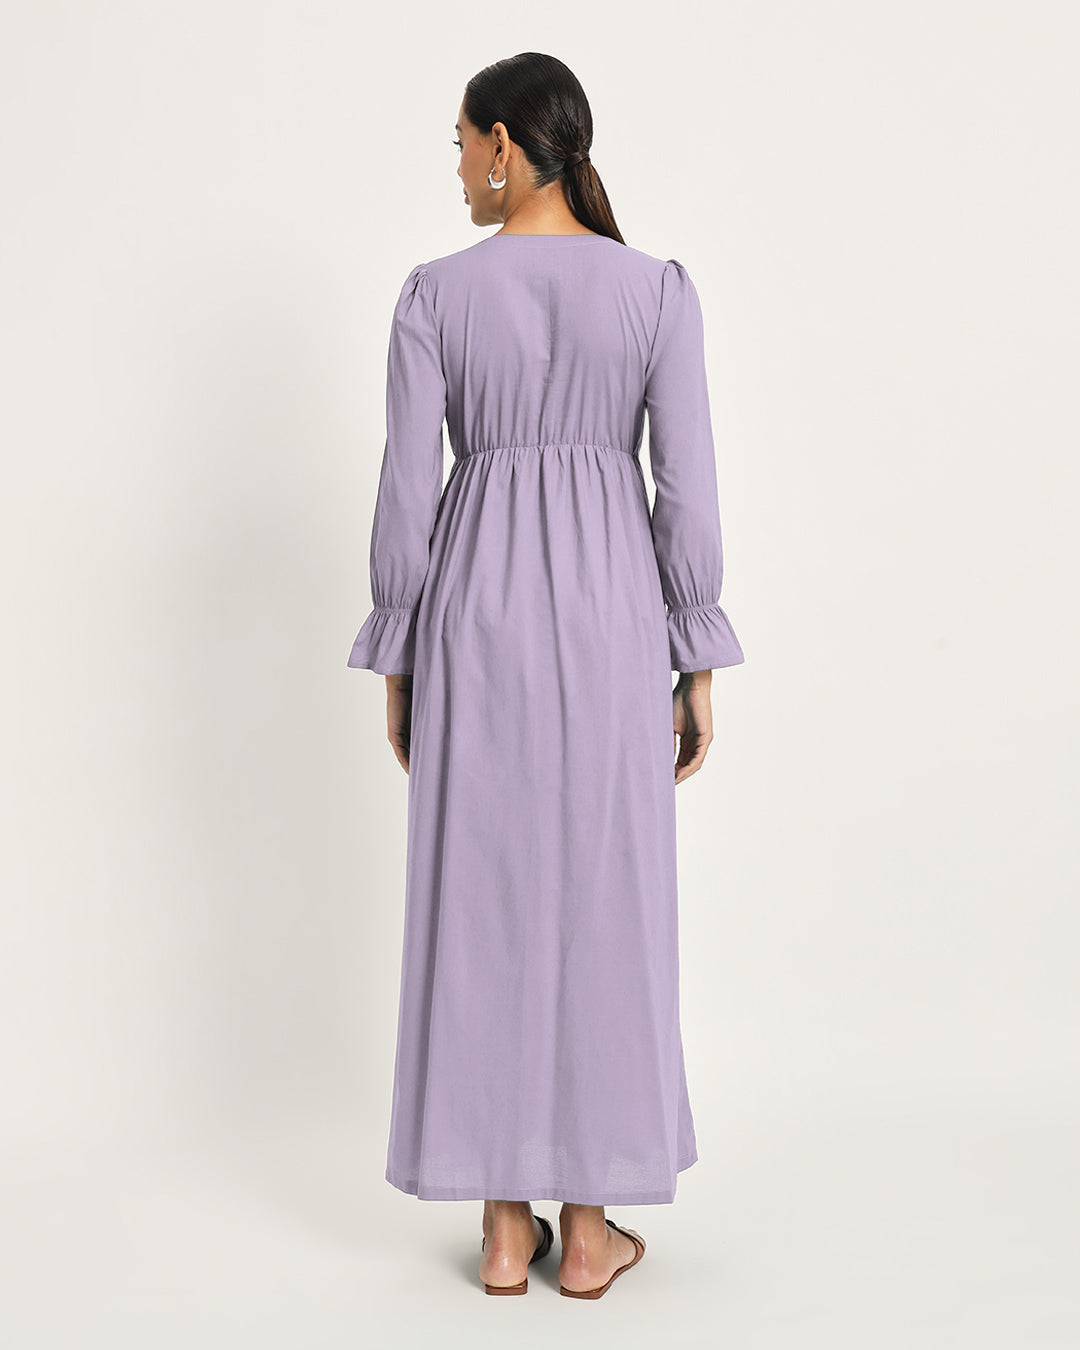 Combo: Lilac & Sage Green Day-Night Ease Nightdress